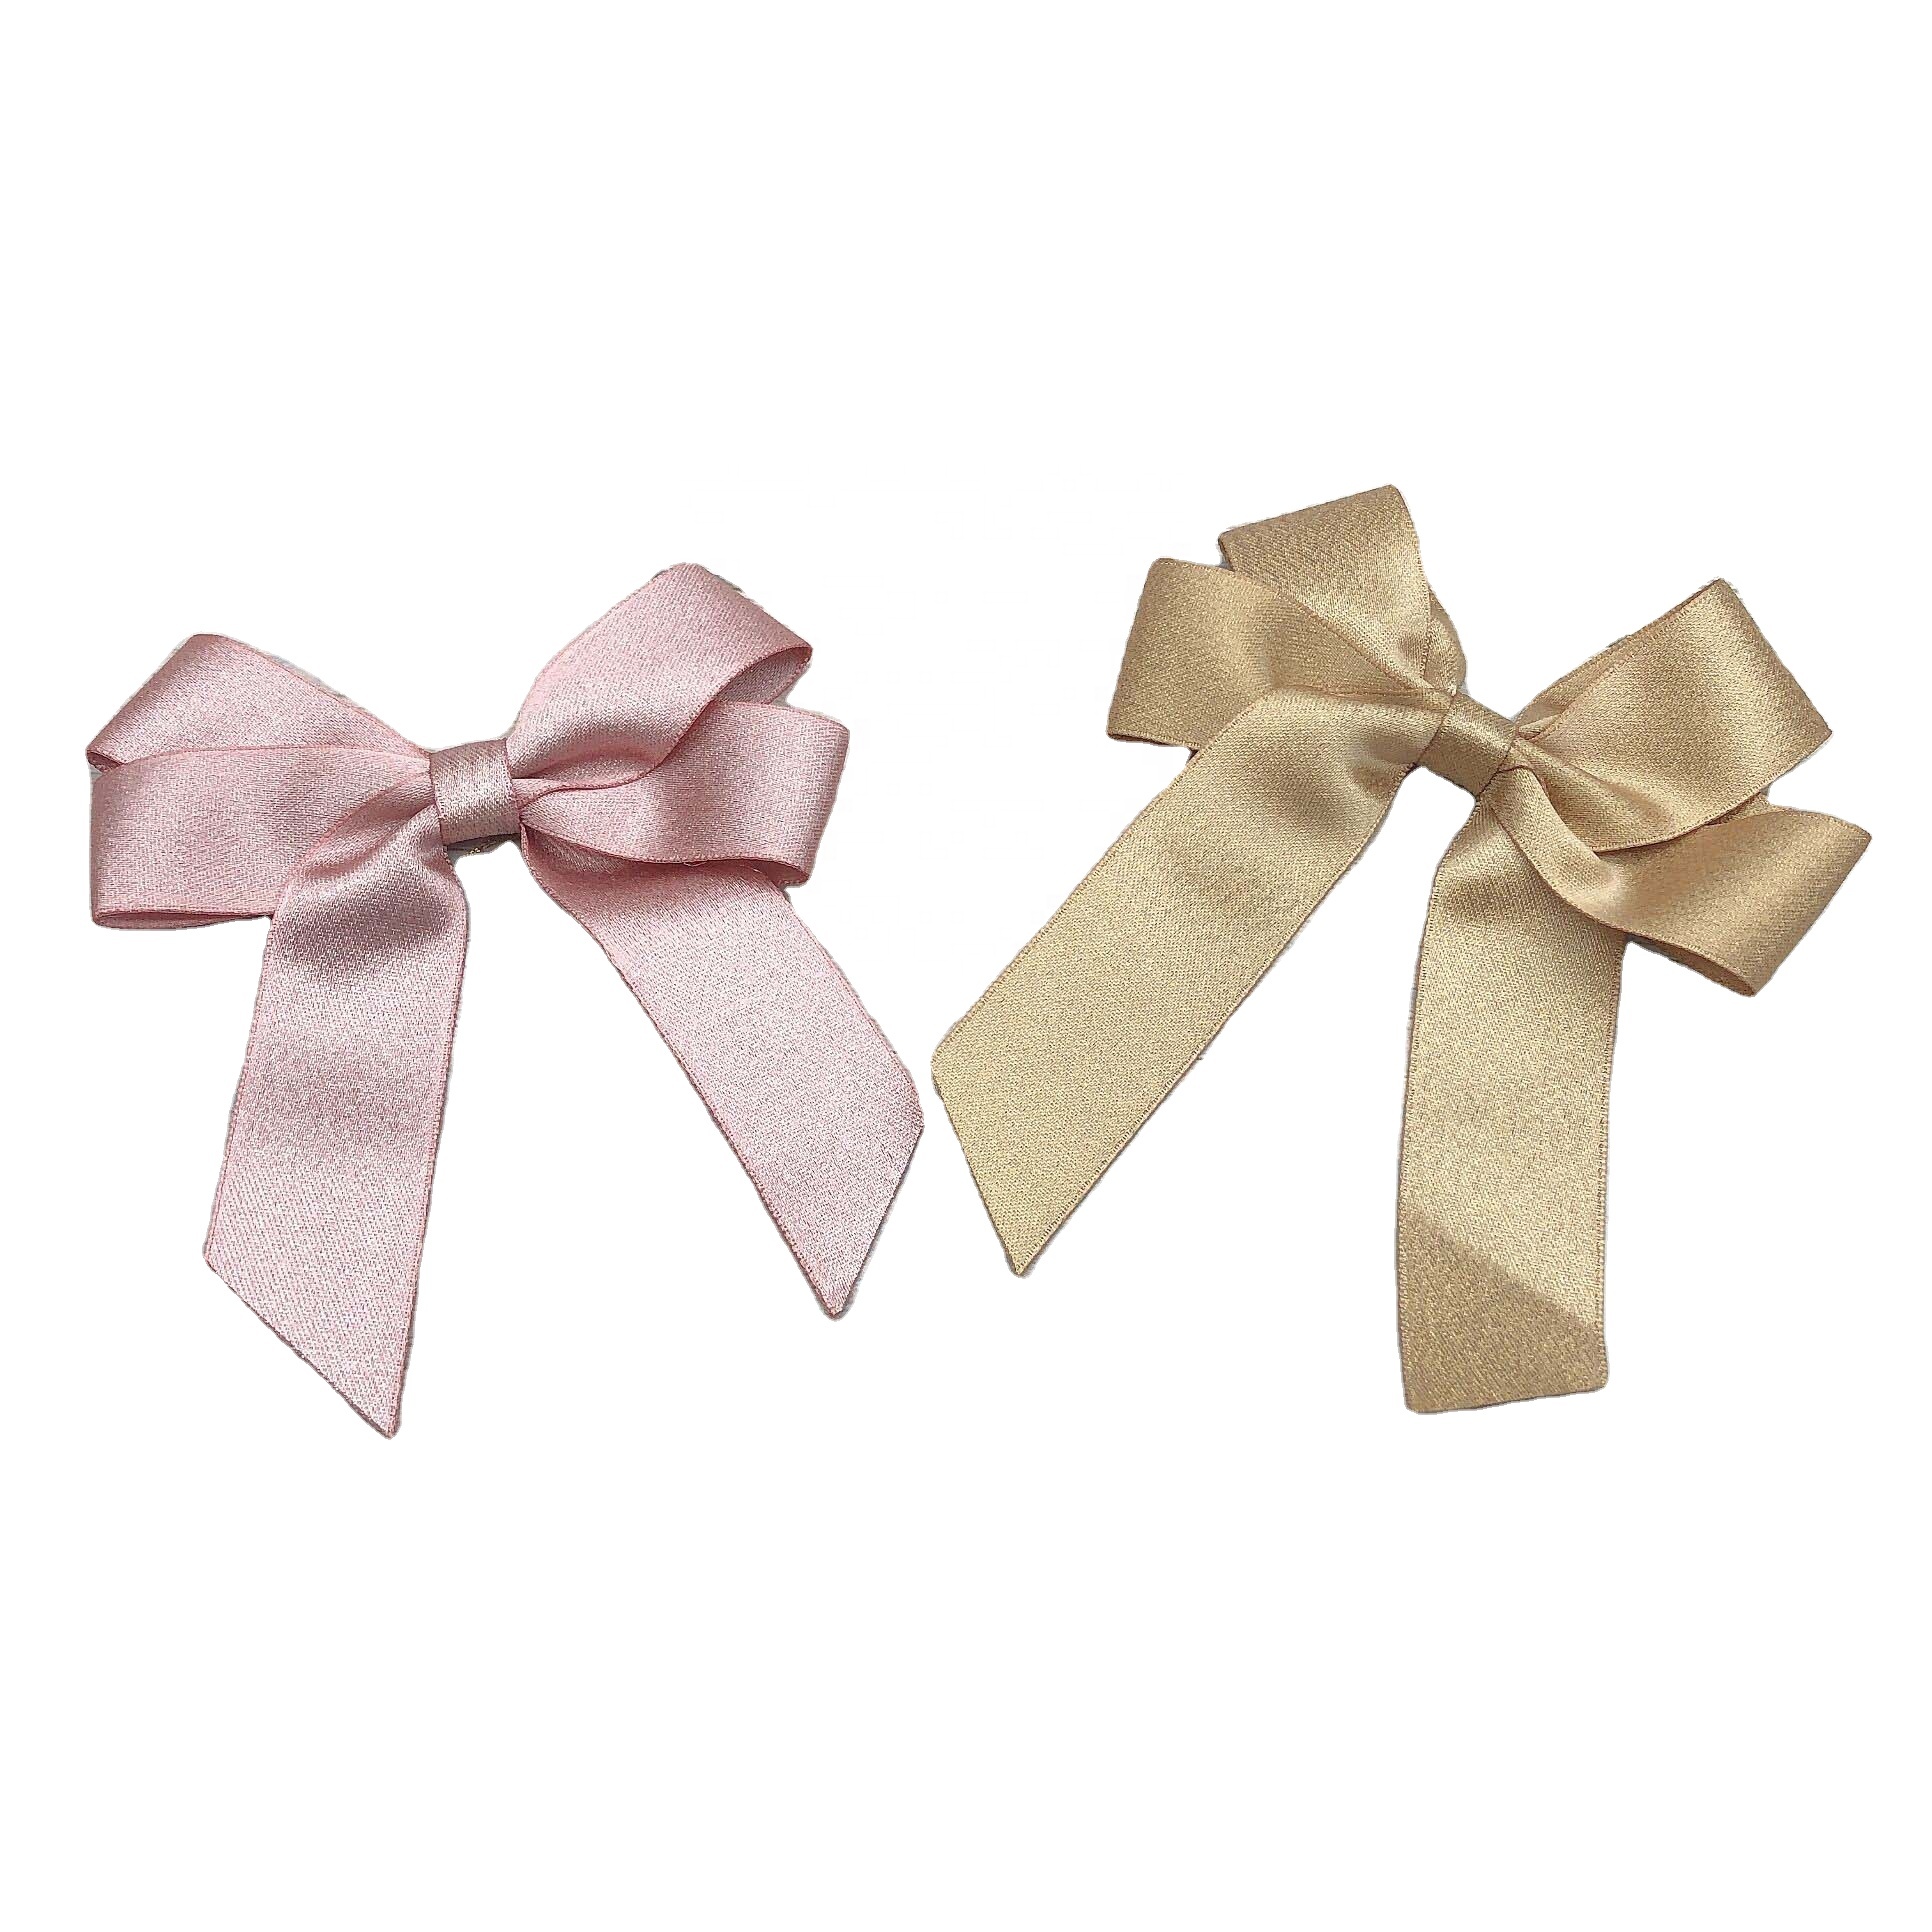 Gordon Ribbons Wholesale High Quality Fancy Metallic Packing Bow  for Gift Wrapping